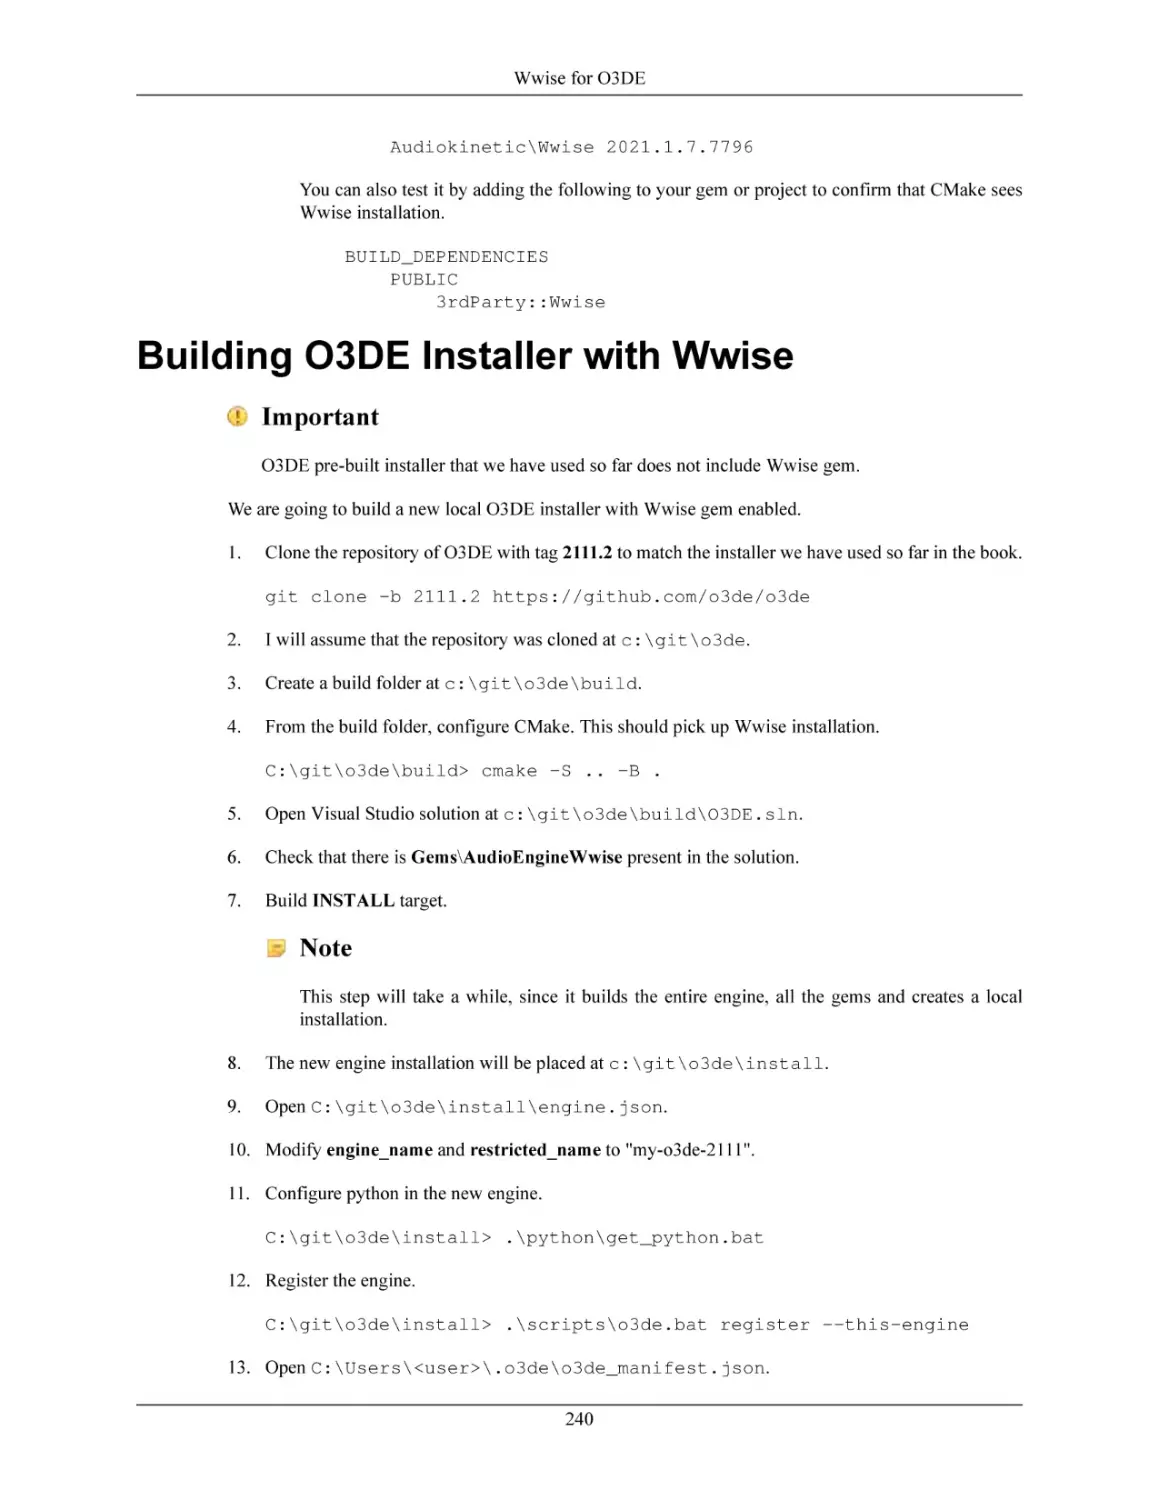 Building O3DE Installer with Wwise